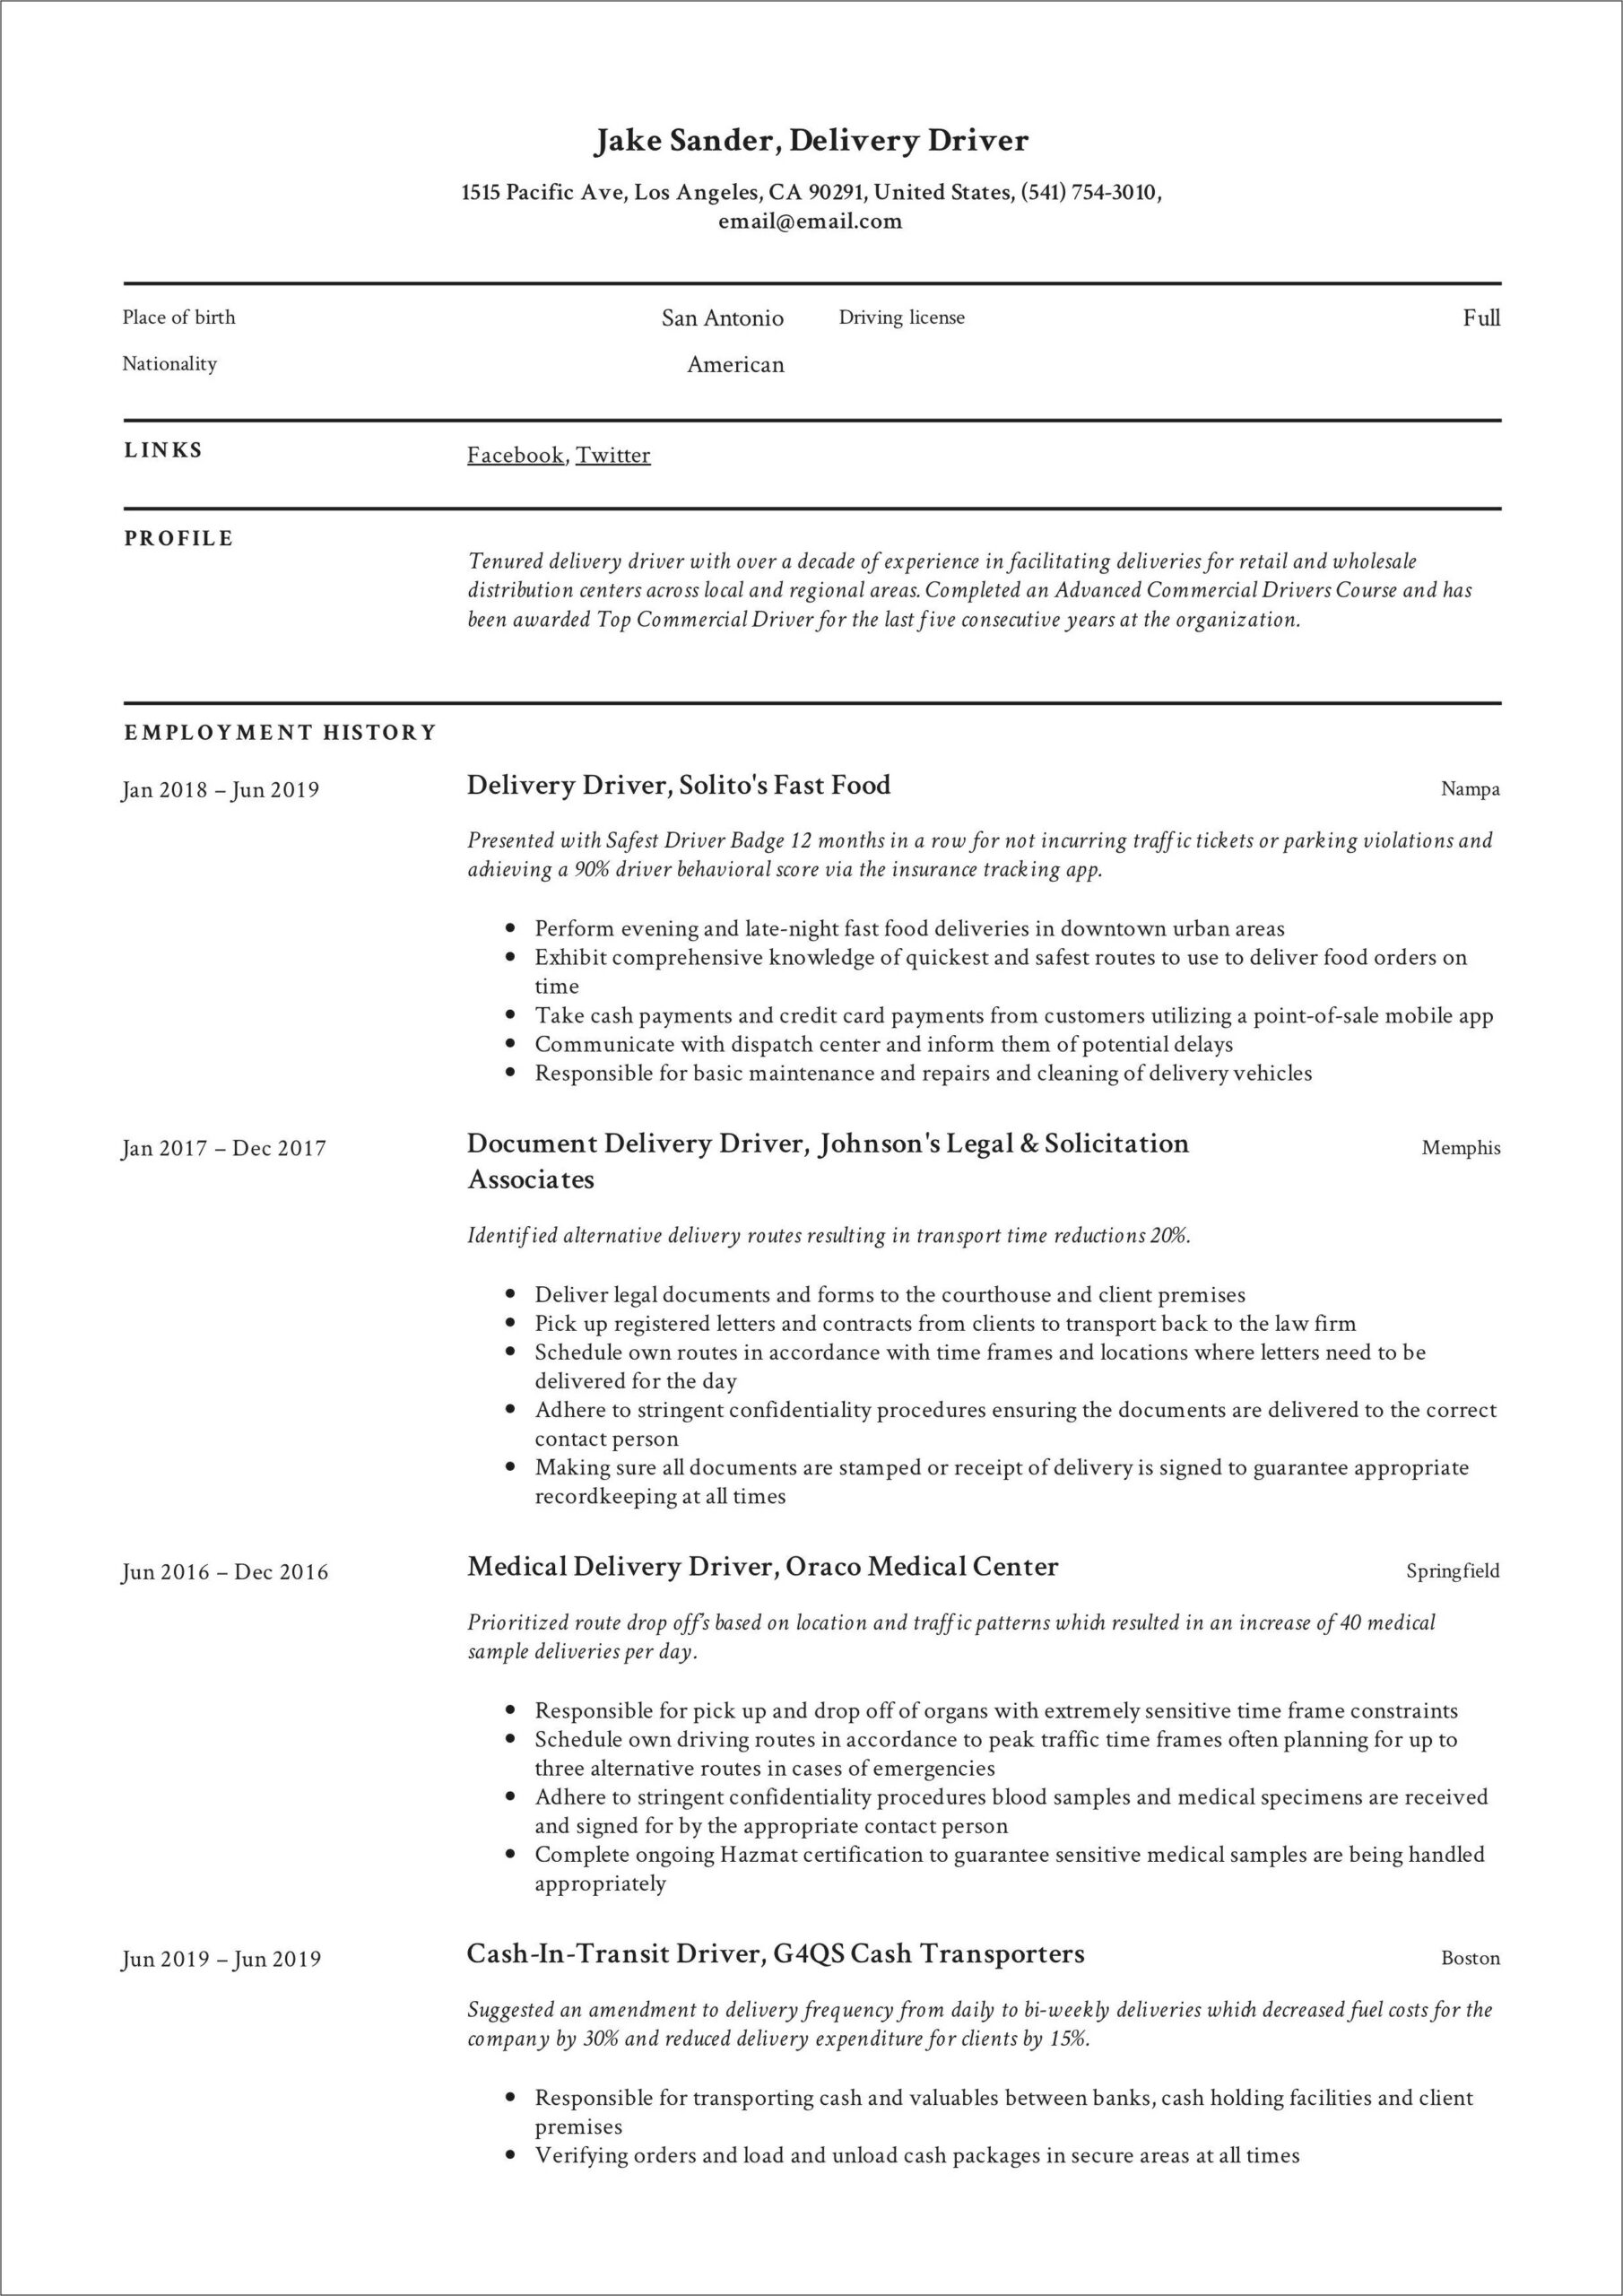 Resume Sample For Delivery Driver